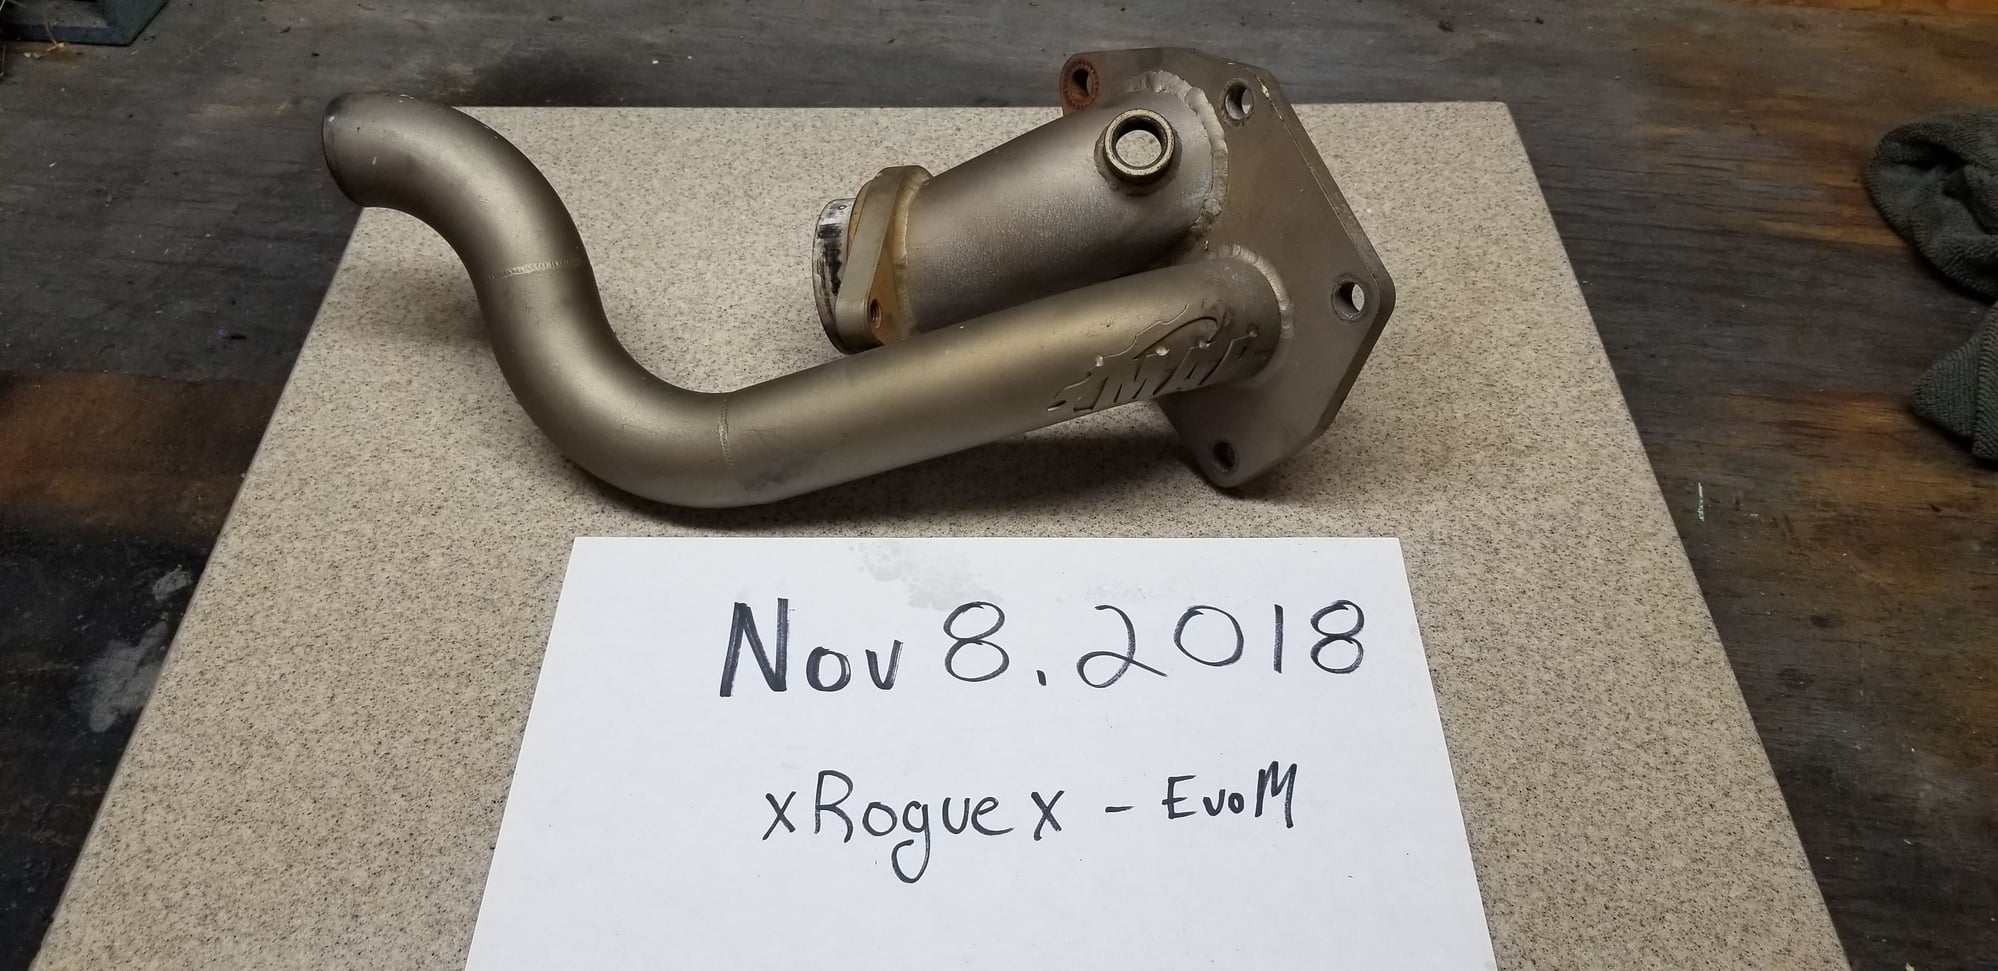 Engine - Internals - Evo8/9 - Manley Turbo Tuff, BF272s, FP SS O2, 4g64 block, BR Downpipe, MAP 02, etc. - Used - Harwick, PA 15049, United States